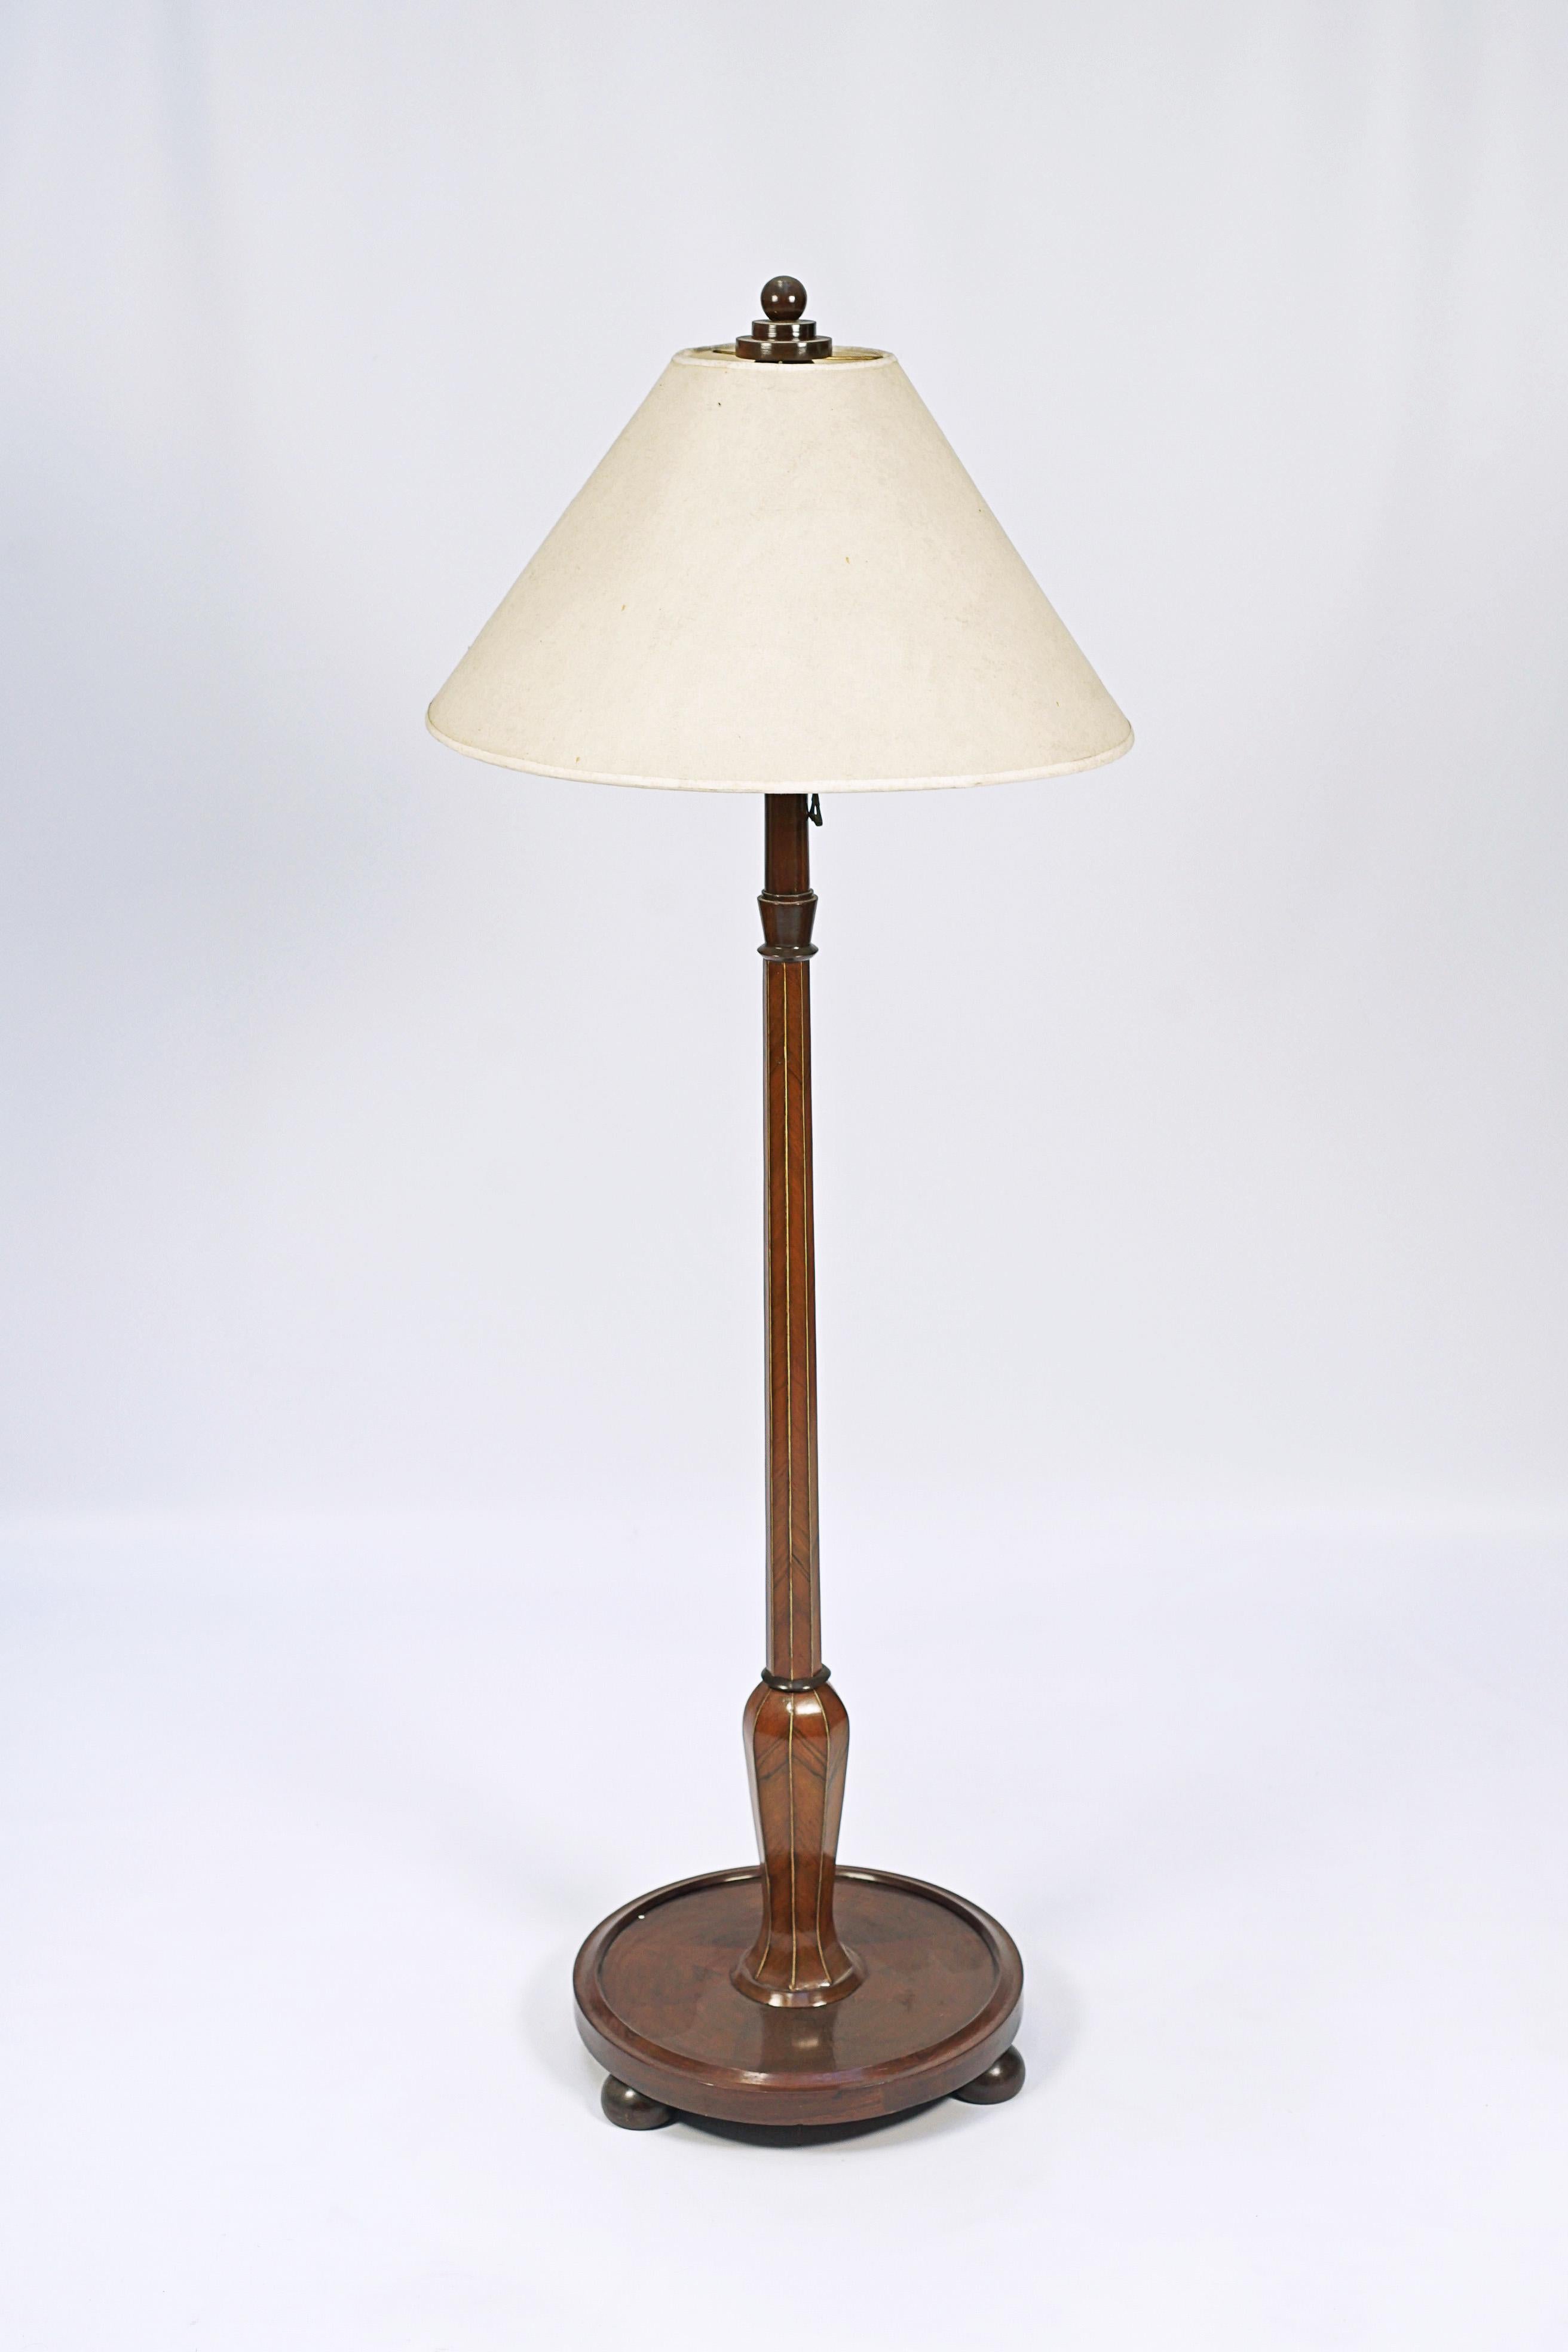 Single standing lamp designed by Jules Leleu (1883-1961). Wood with inlays and cloth shade, the lamp has the original switch.

France, CIRCA 1920.